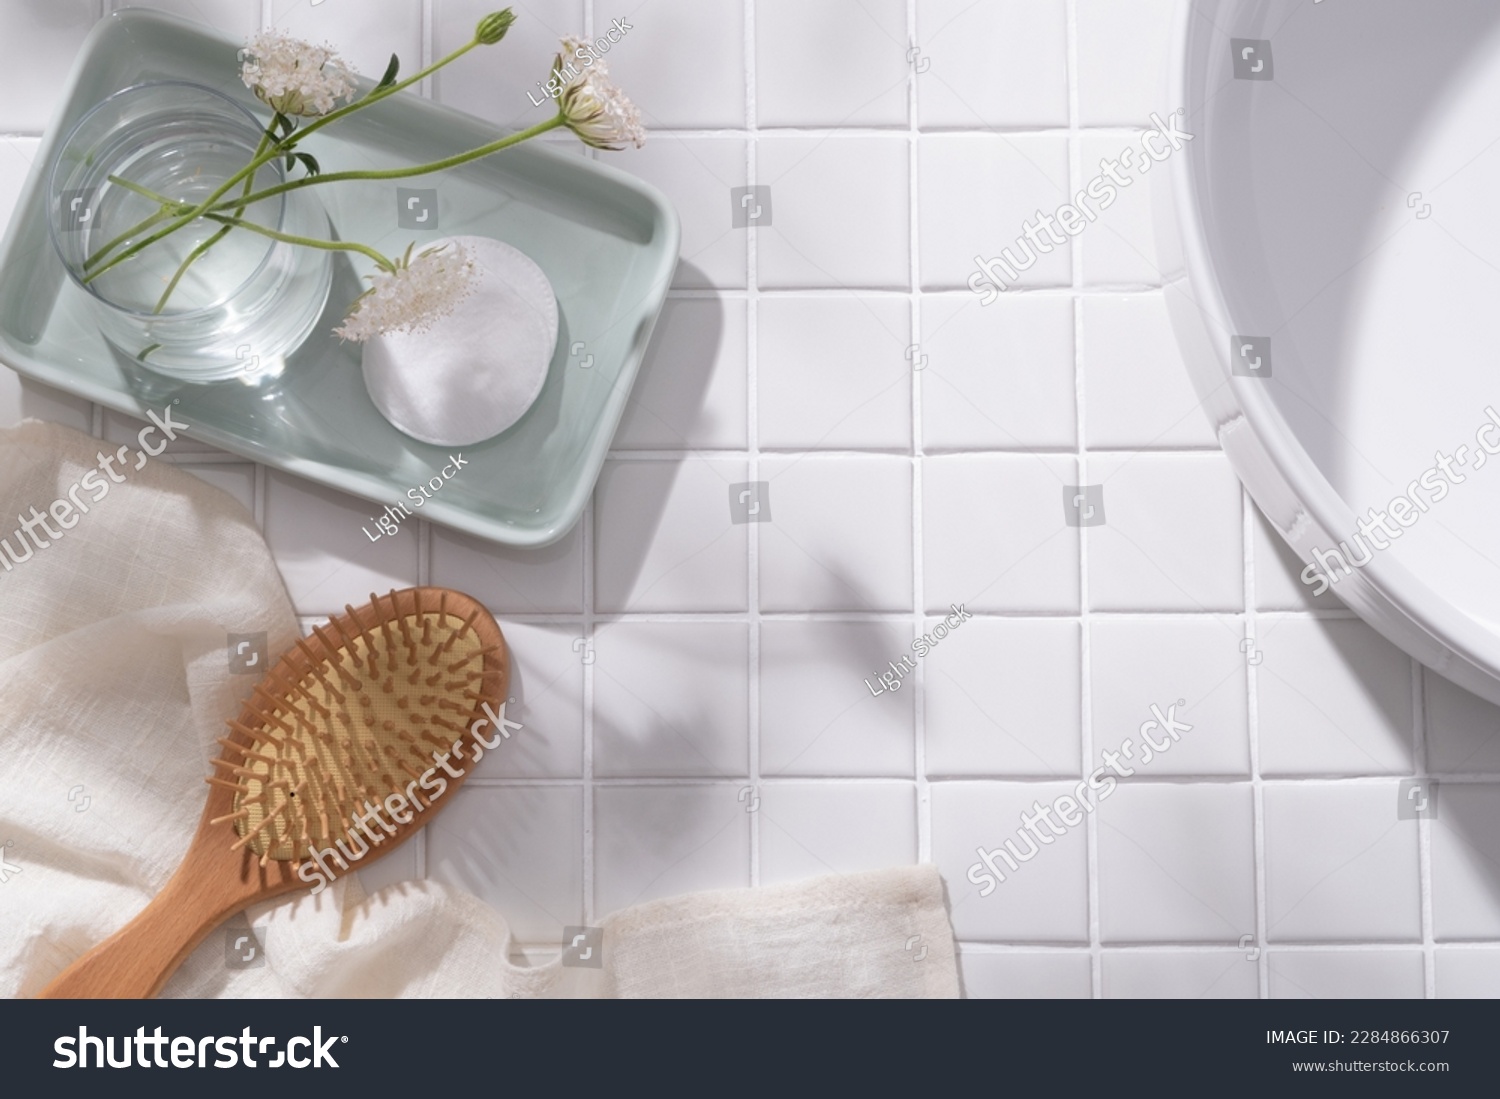 A pastel tray in rectangle shape with a flower vase and a cotton pad placed on, wooden brush with towel and wash basin displayed. Blank space for cosmetic product promotion #2284866307